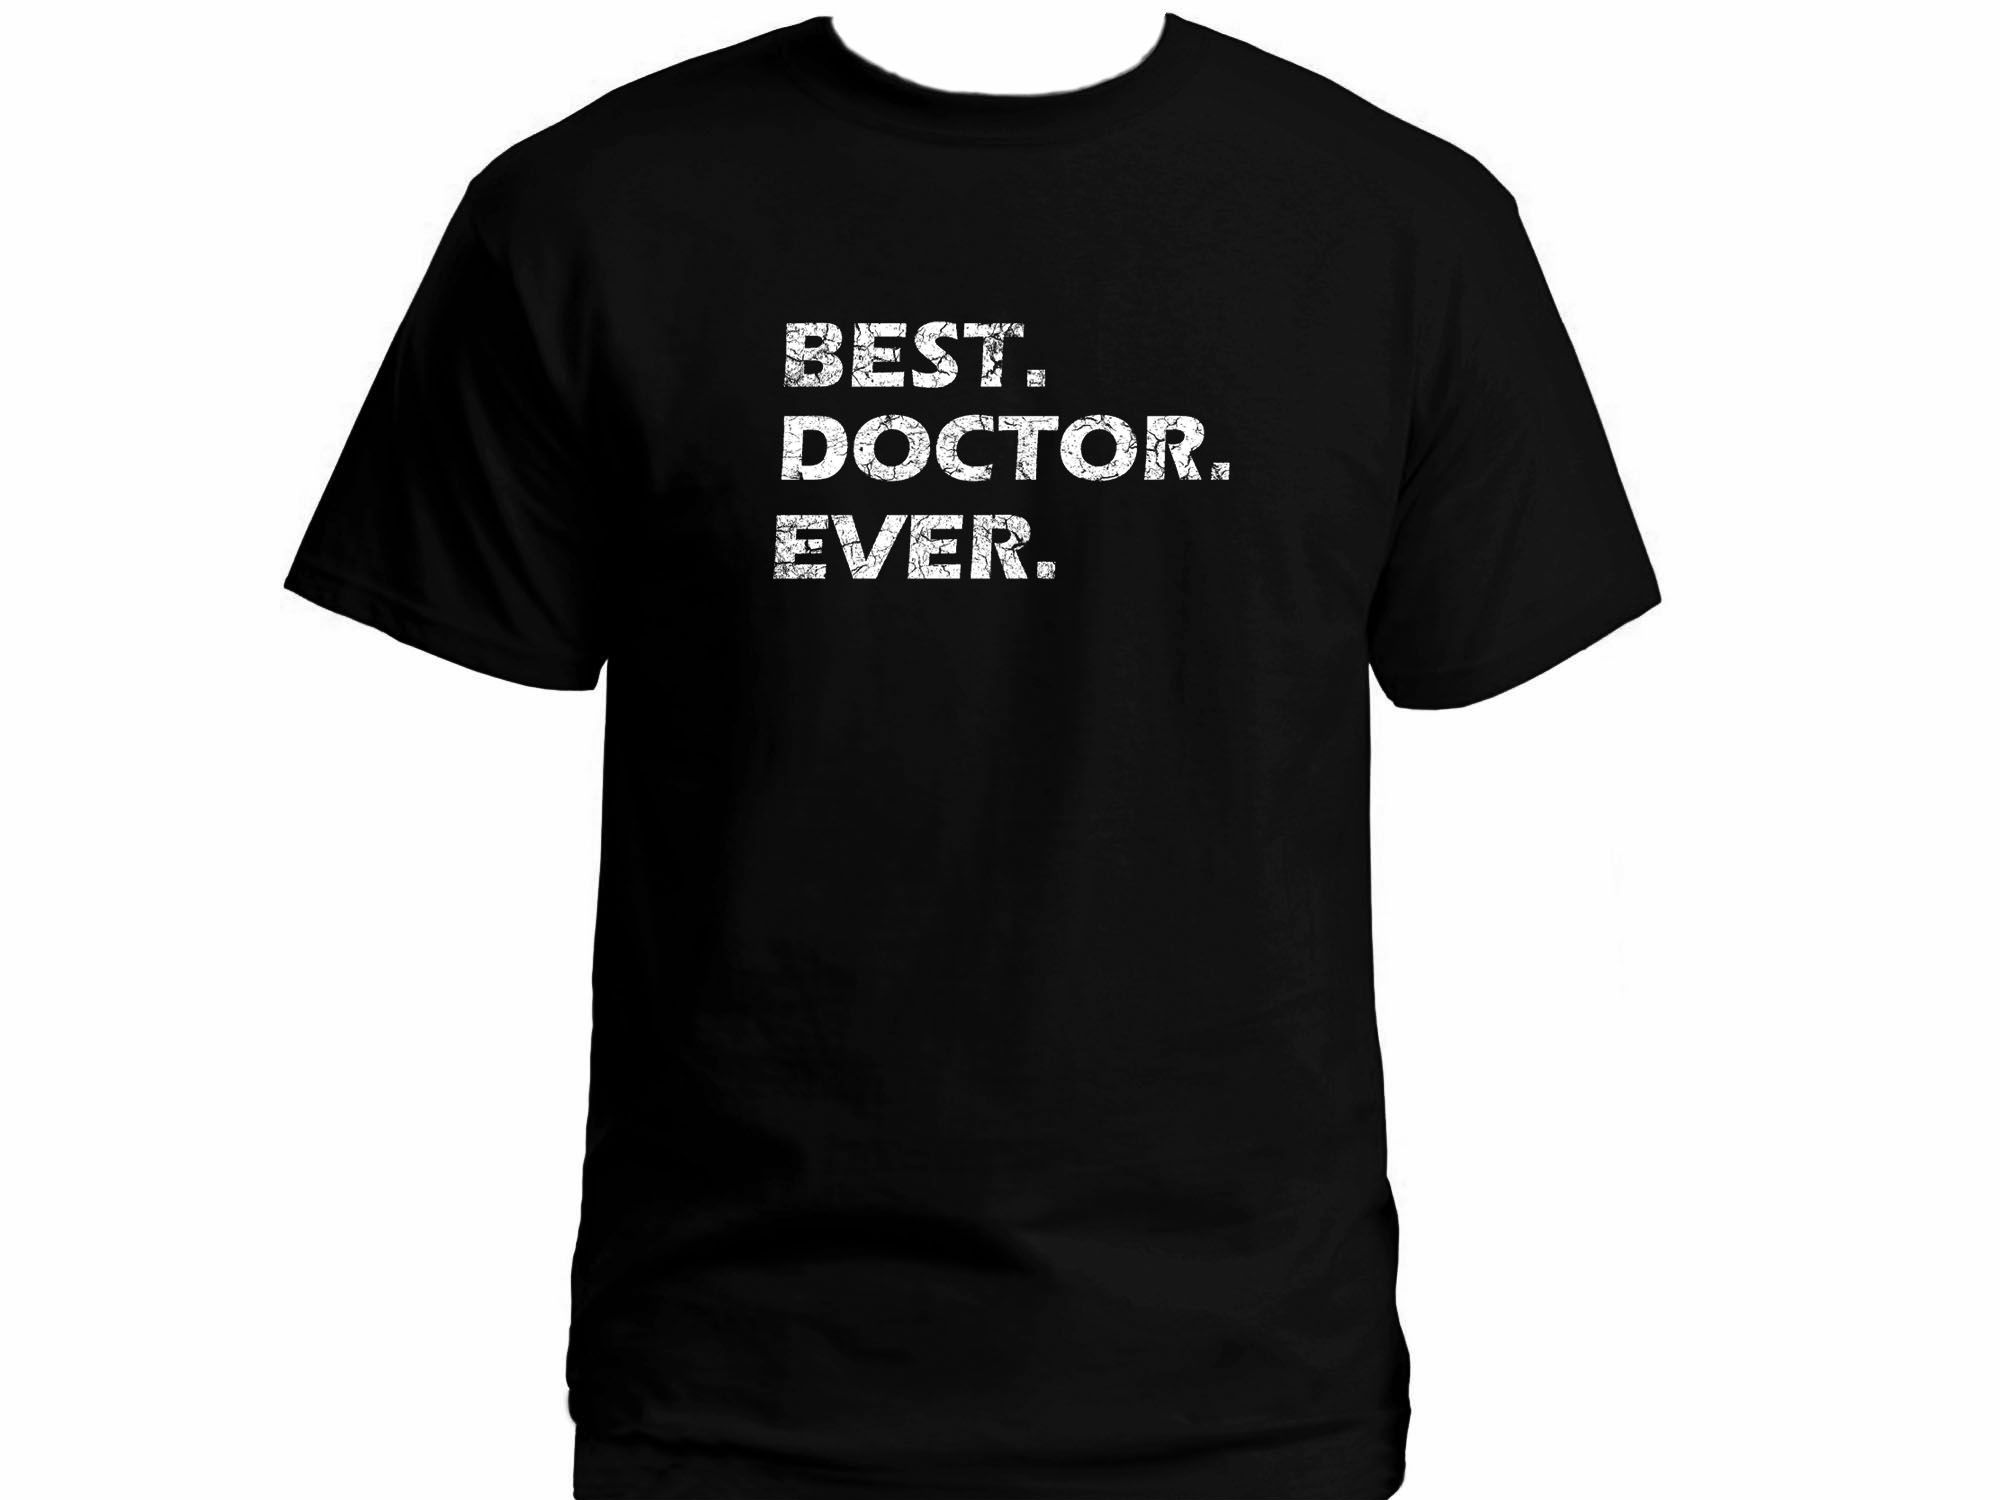 Best doctor ever distressed print t-shirt